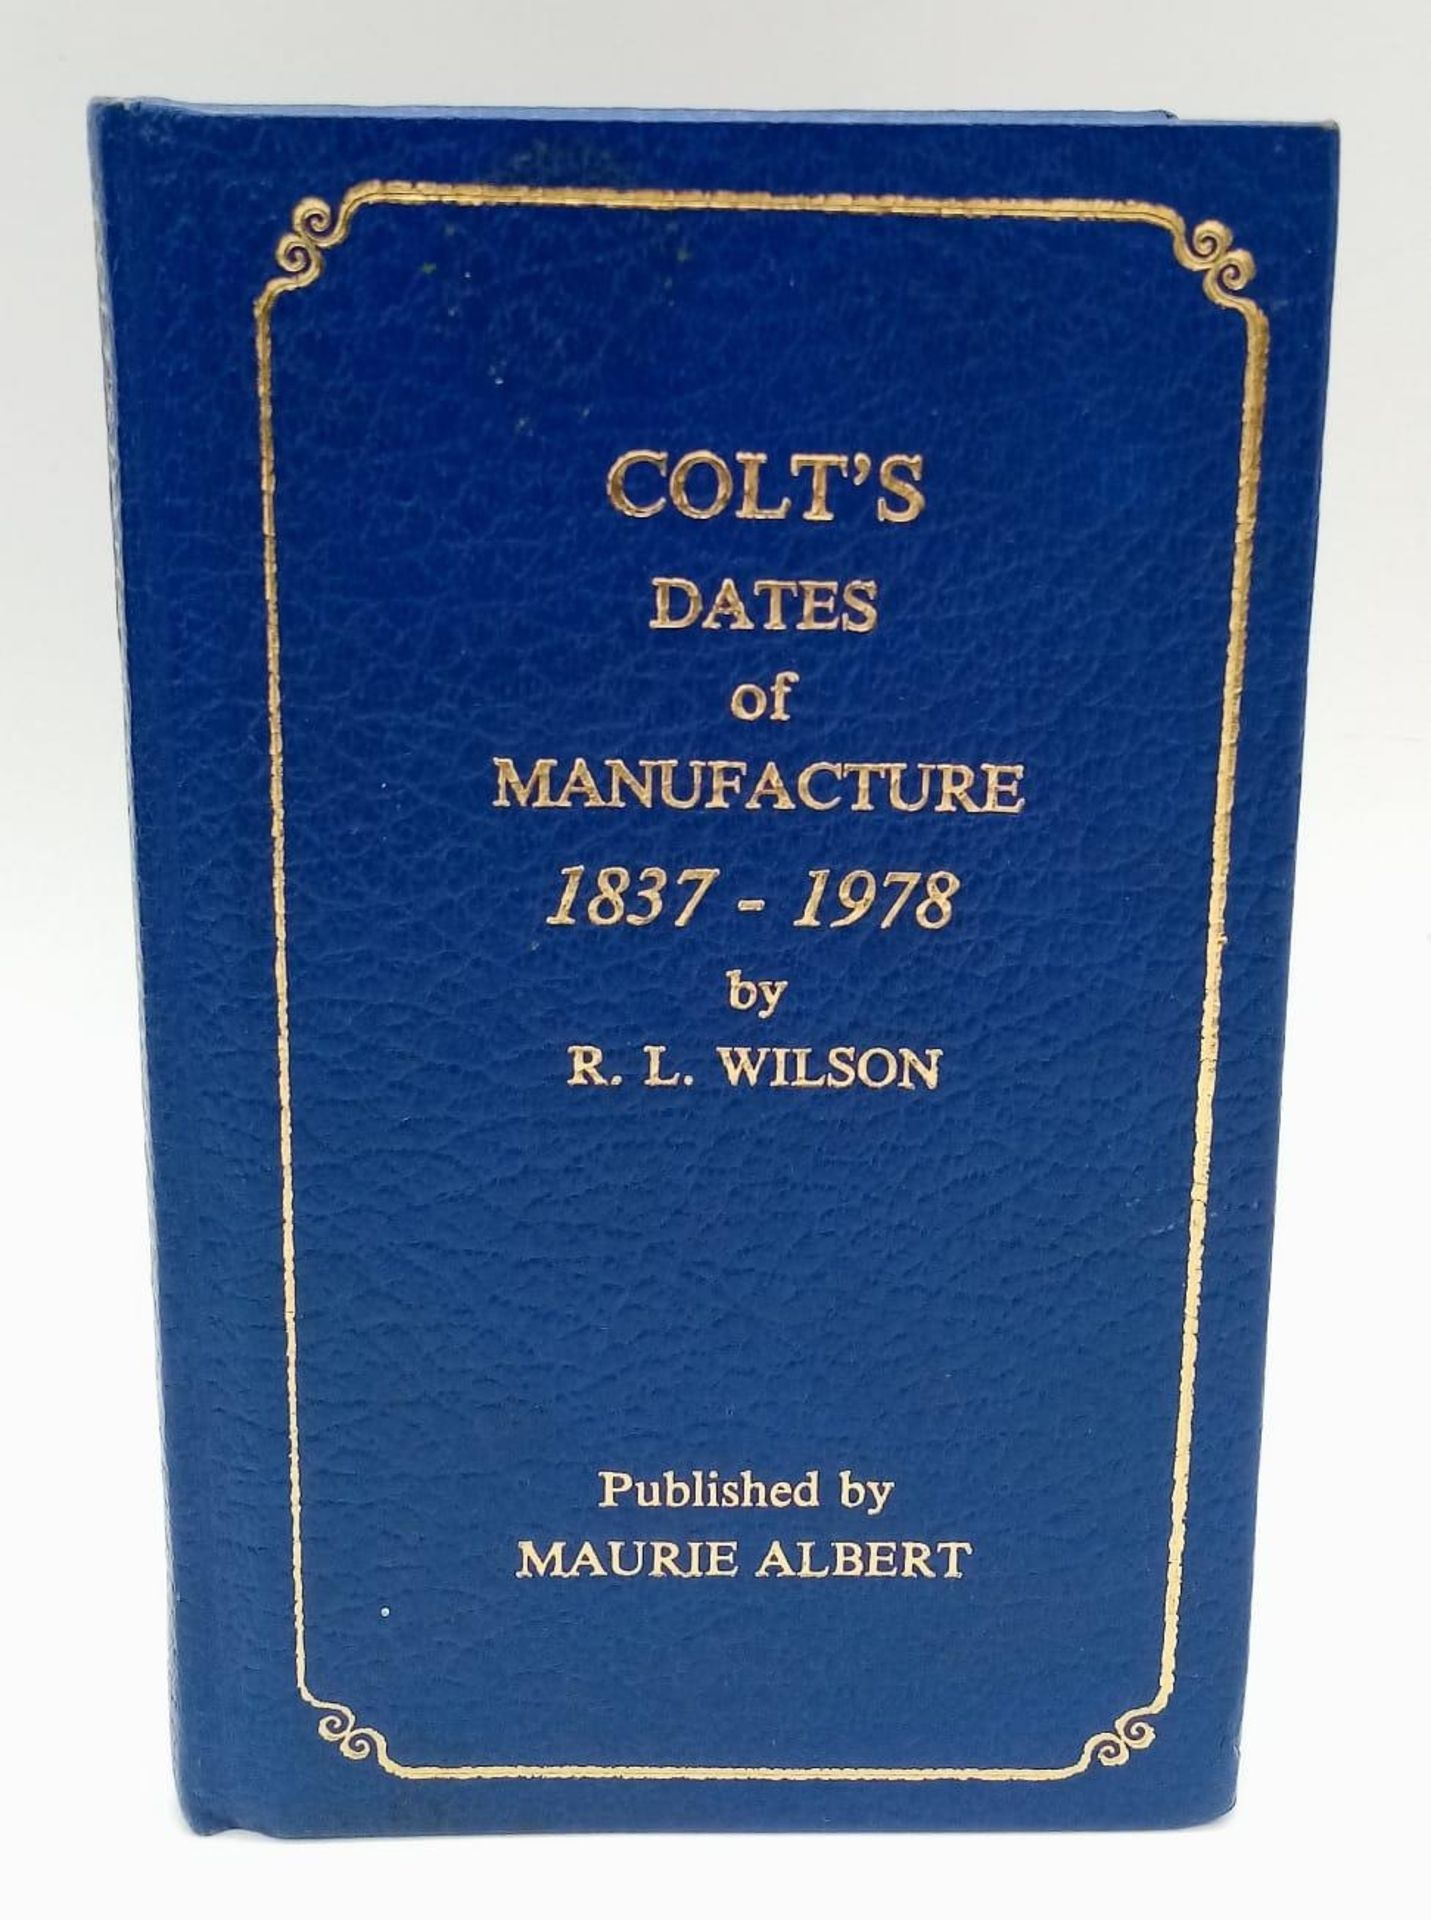 An Excellent Condition Scarce Hardback Book ‘Colt Dates of Manufacture 1837-1978 by R.L Wilson’.